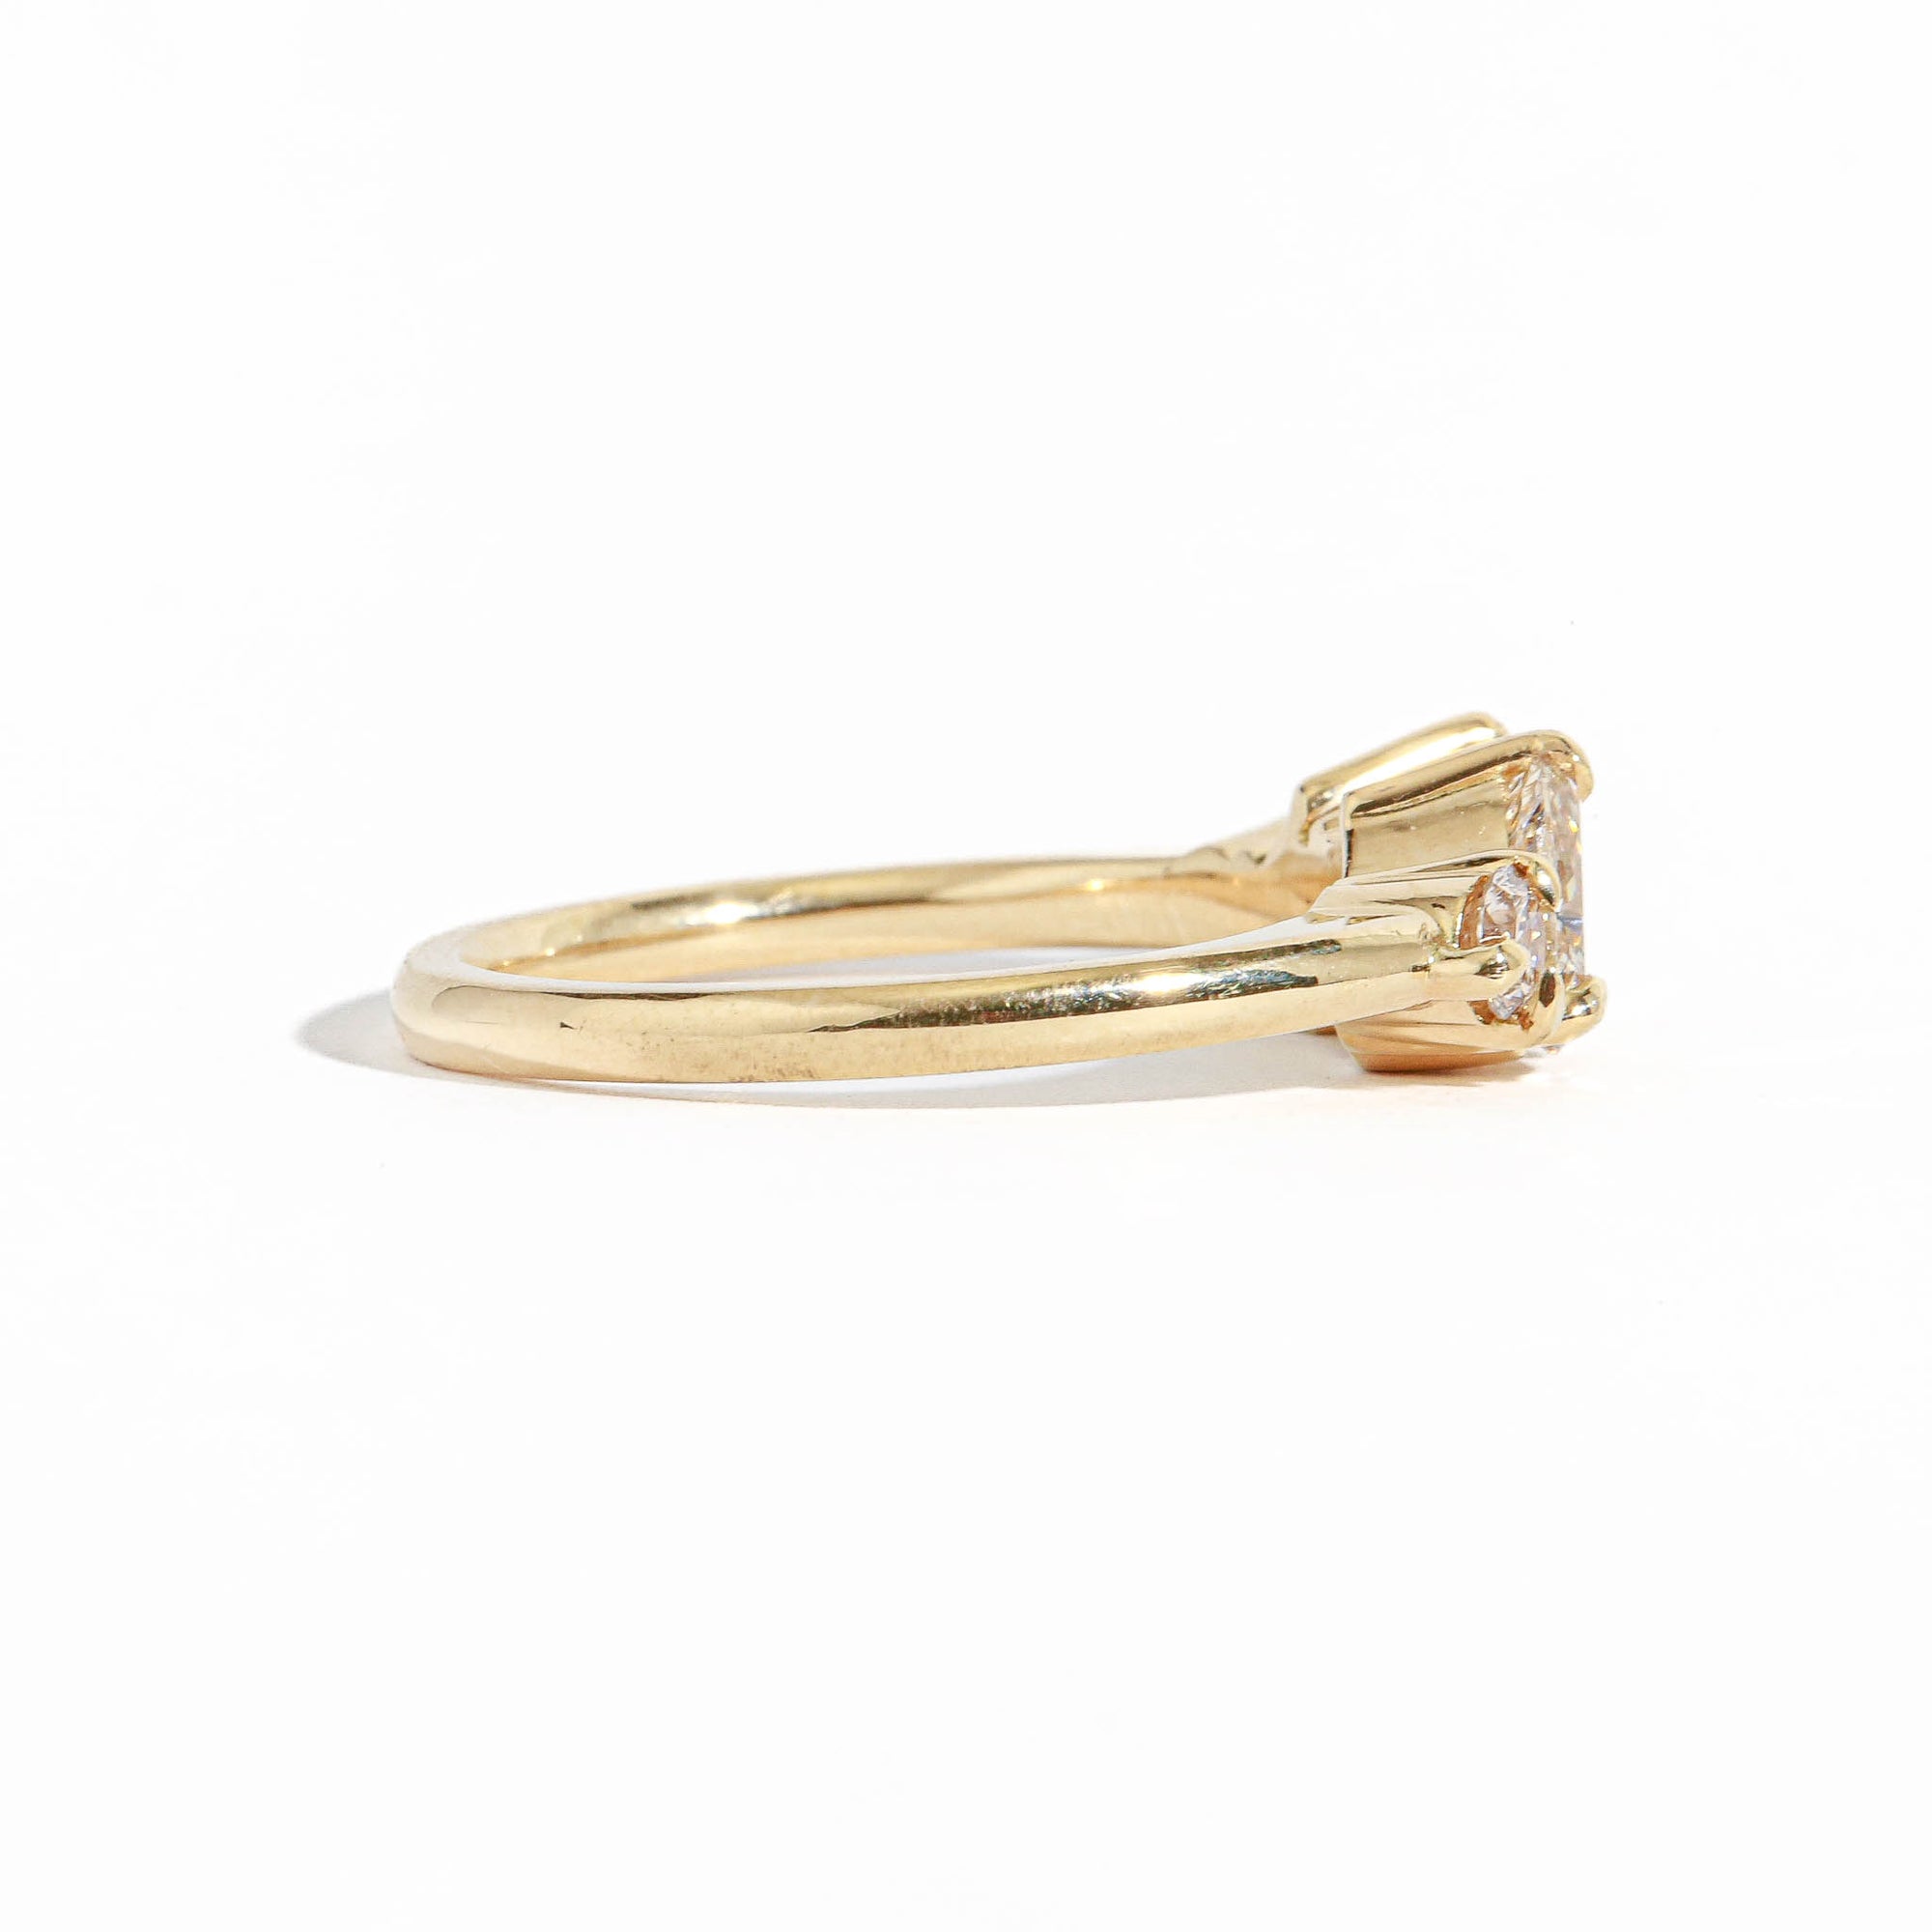 Pear Cut Diamond Cluster Ring in 18ct Yellow Gold